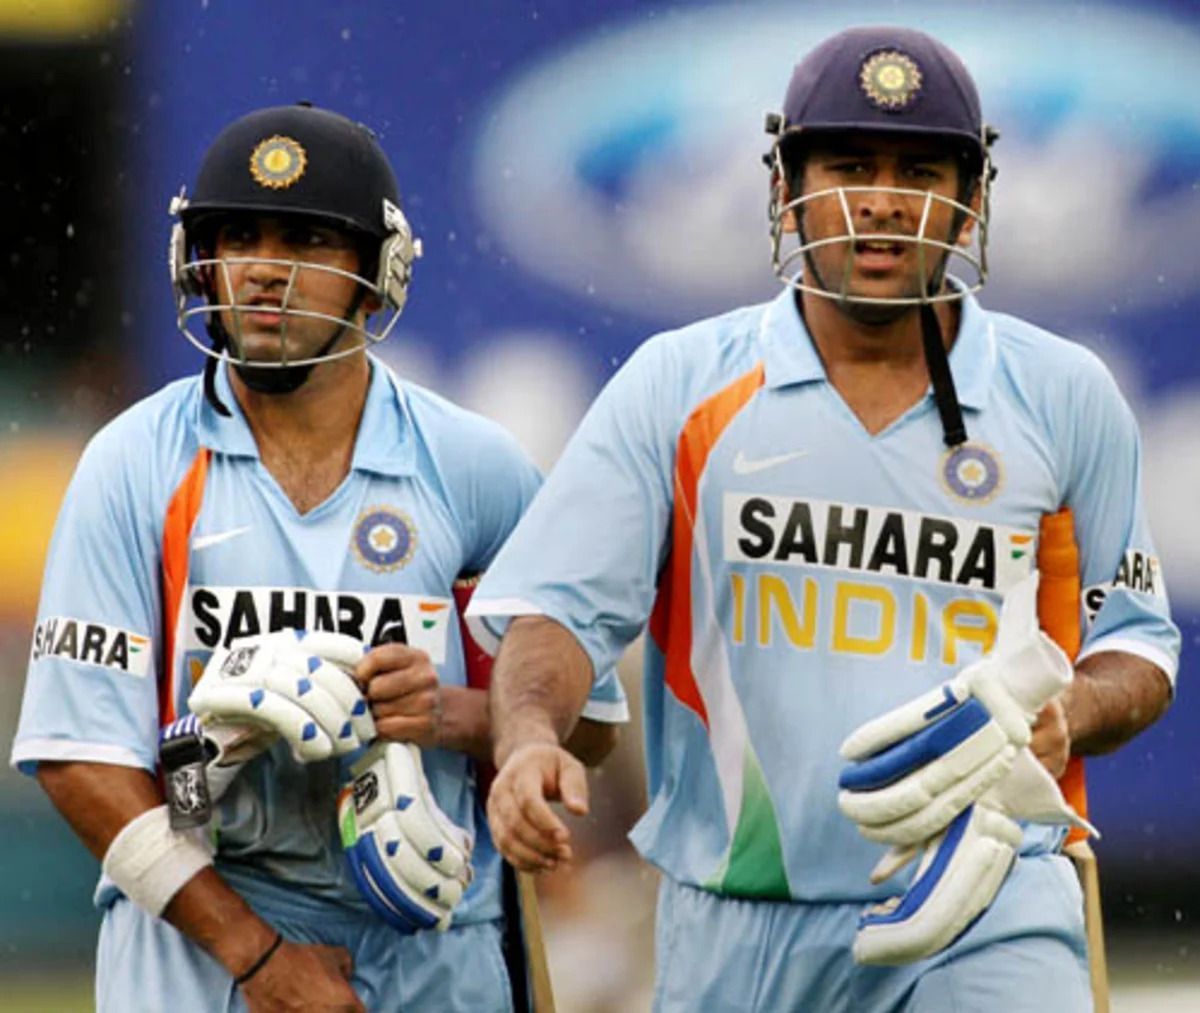 Gambhir and Dhoni added 184 runs in the second match of the CB series against Sri Lanka